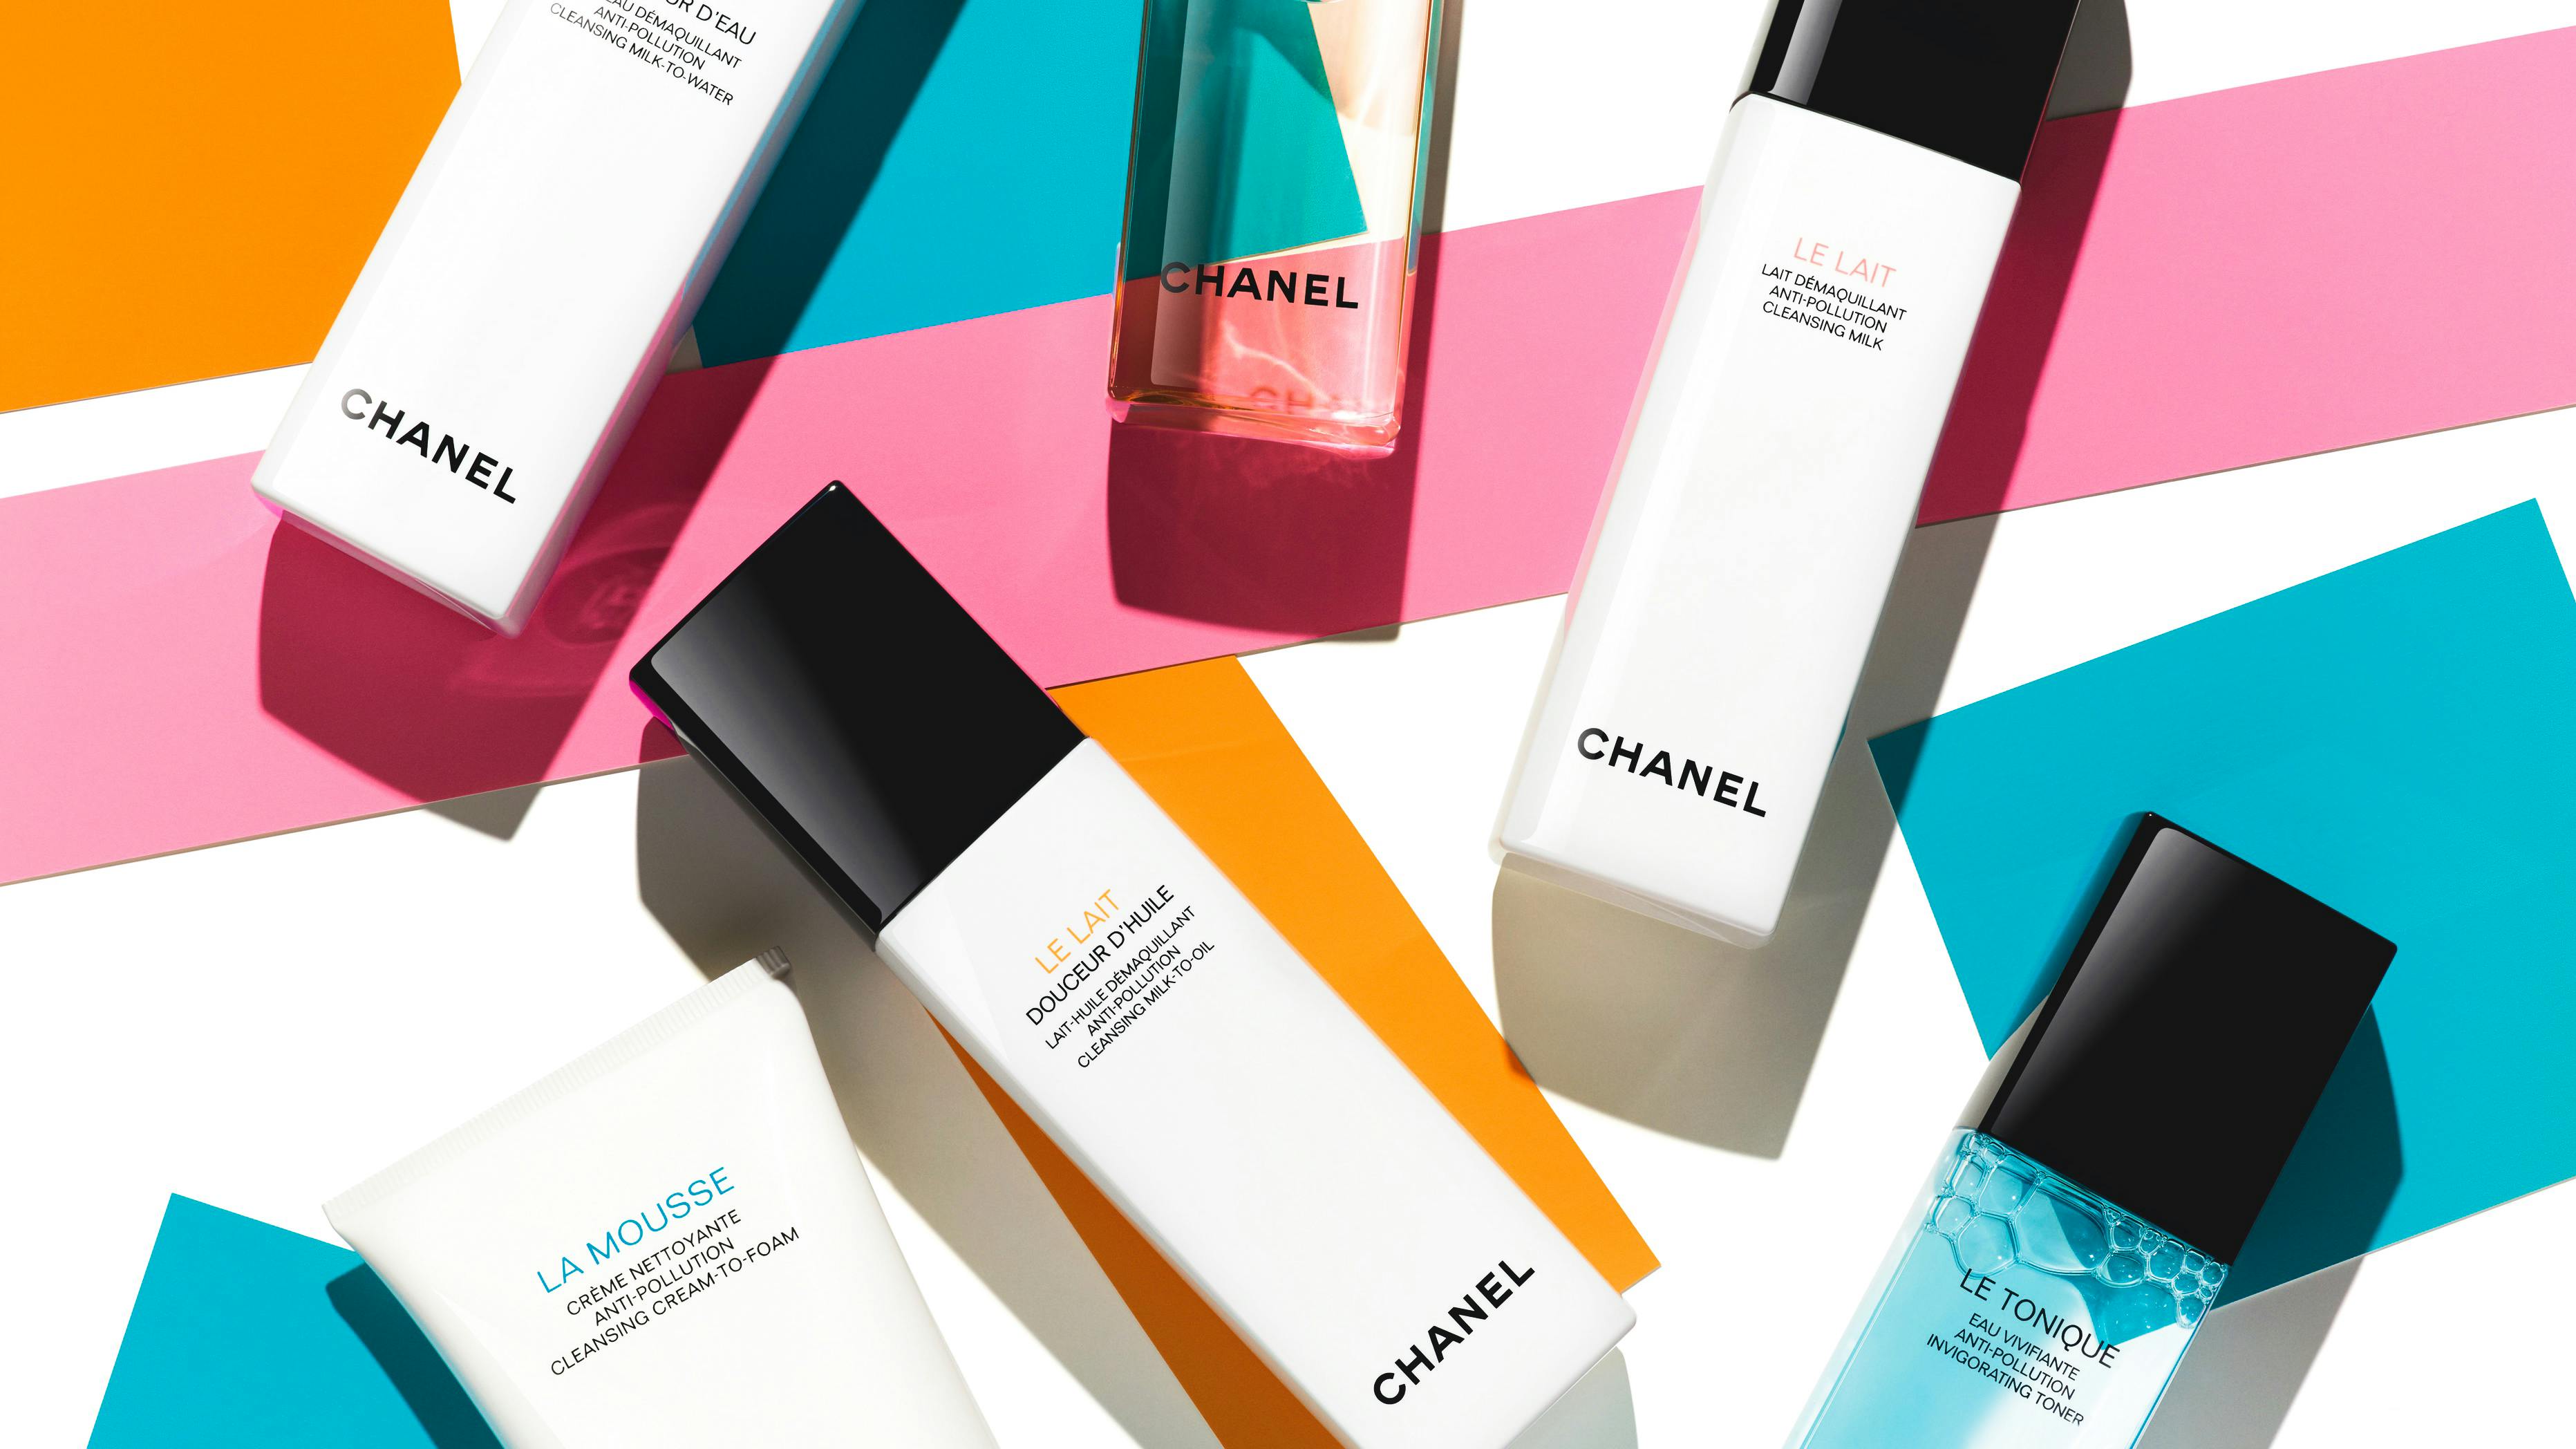 6 textues and 6 sensations: Cleansing Ritual by Chanel Beauty